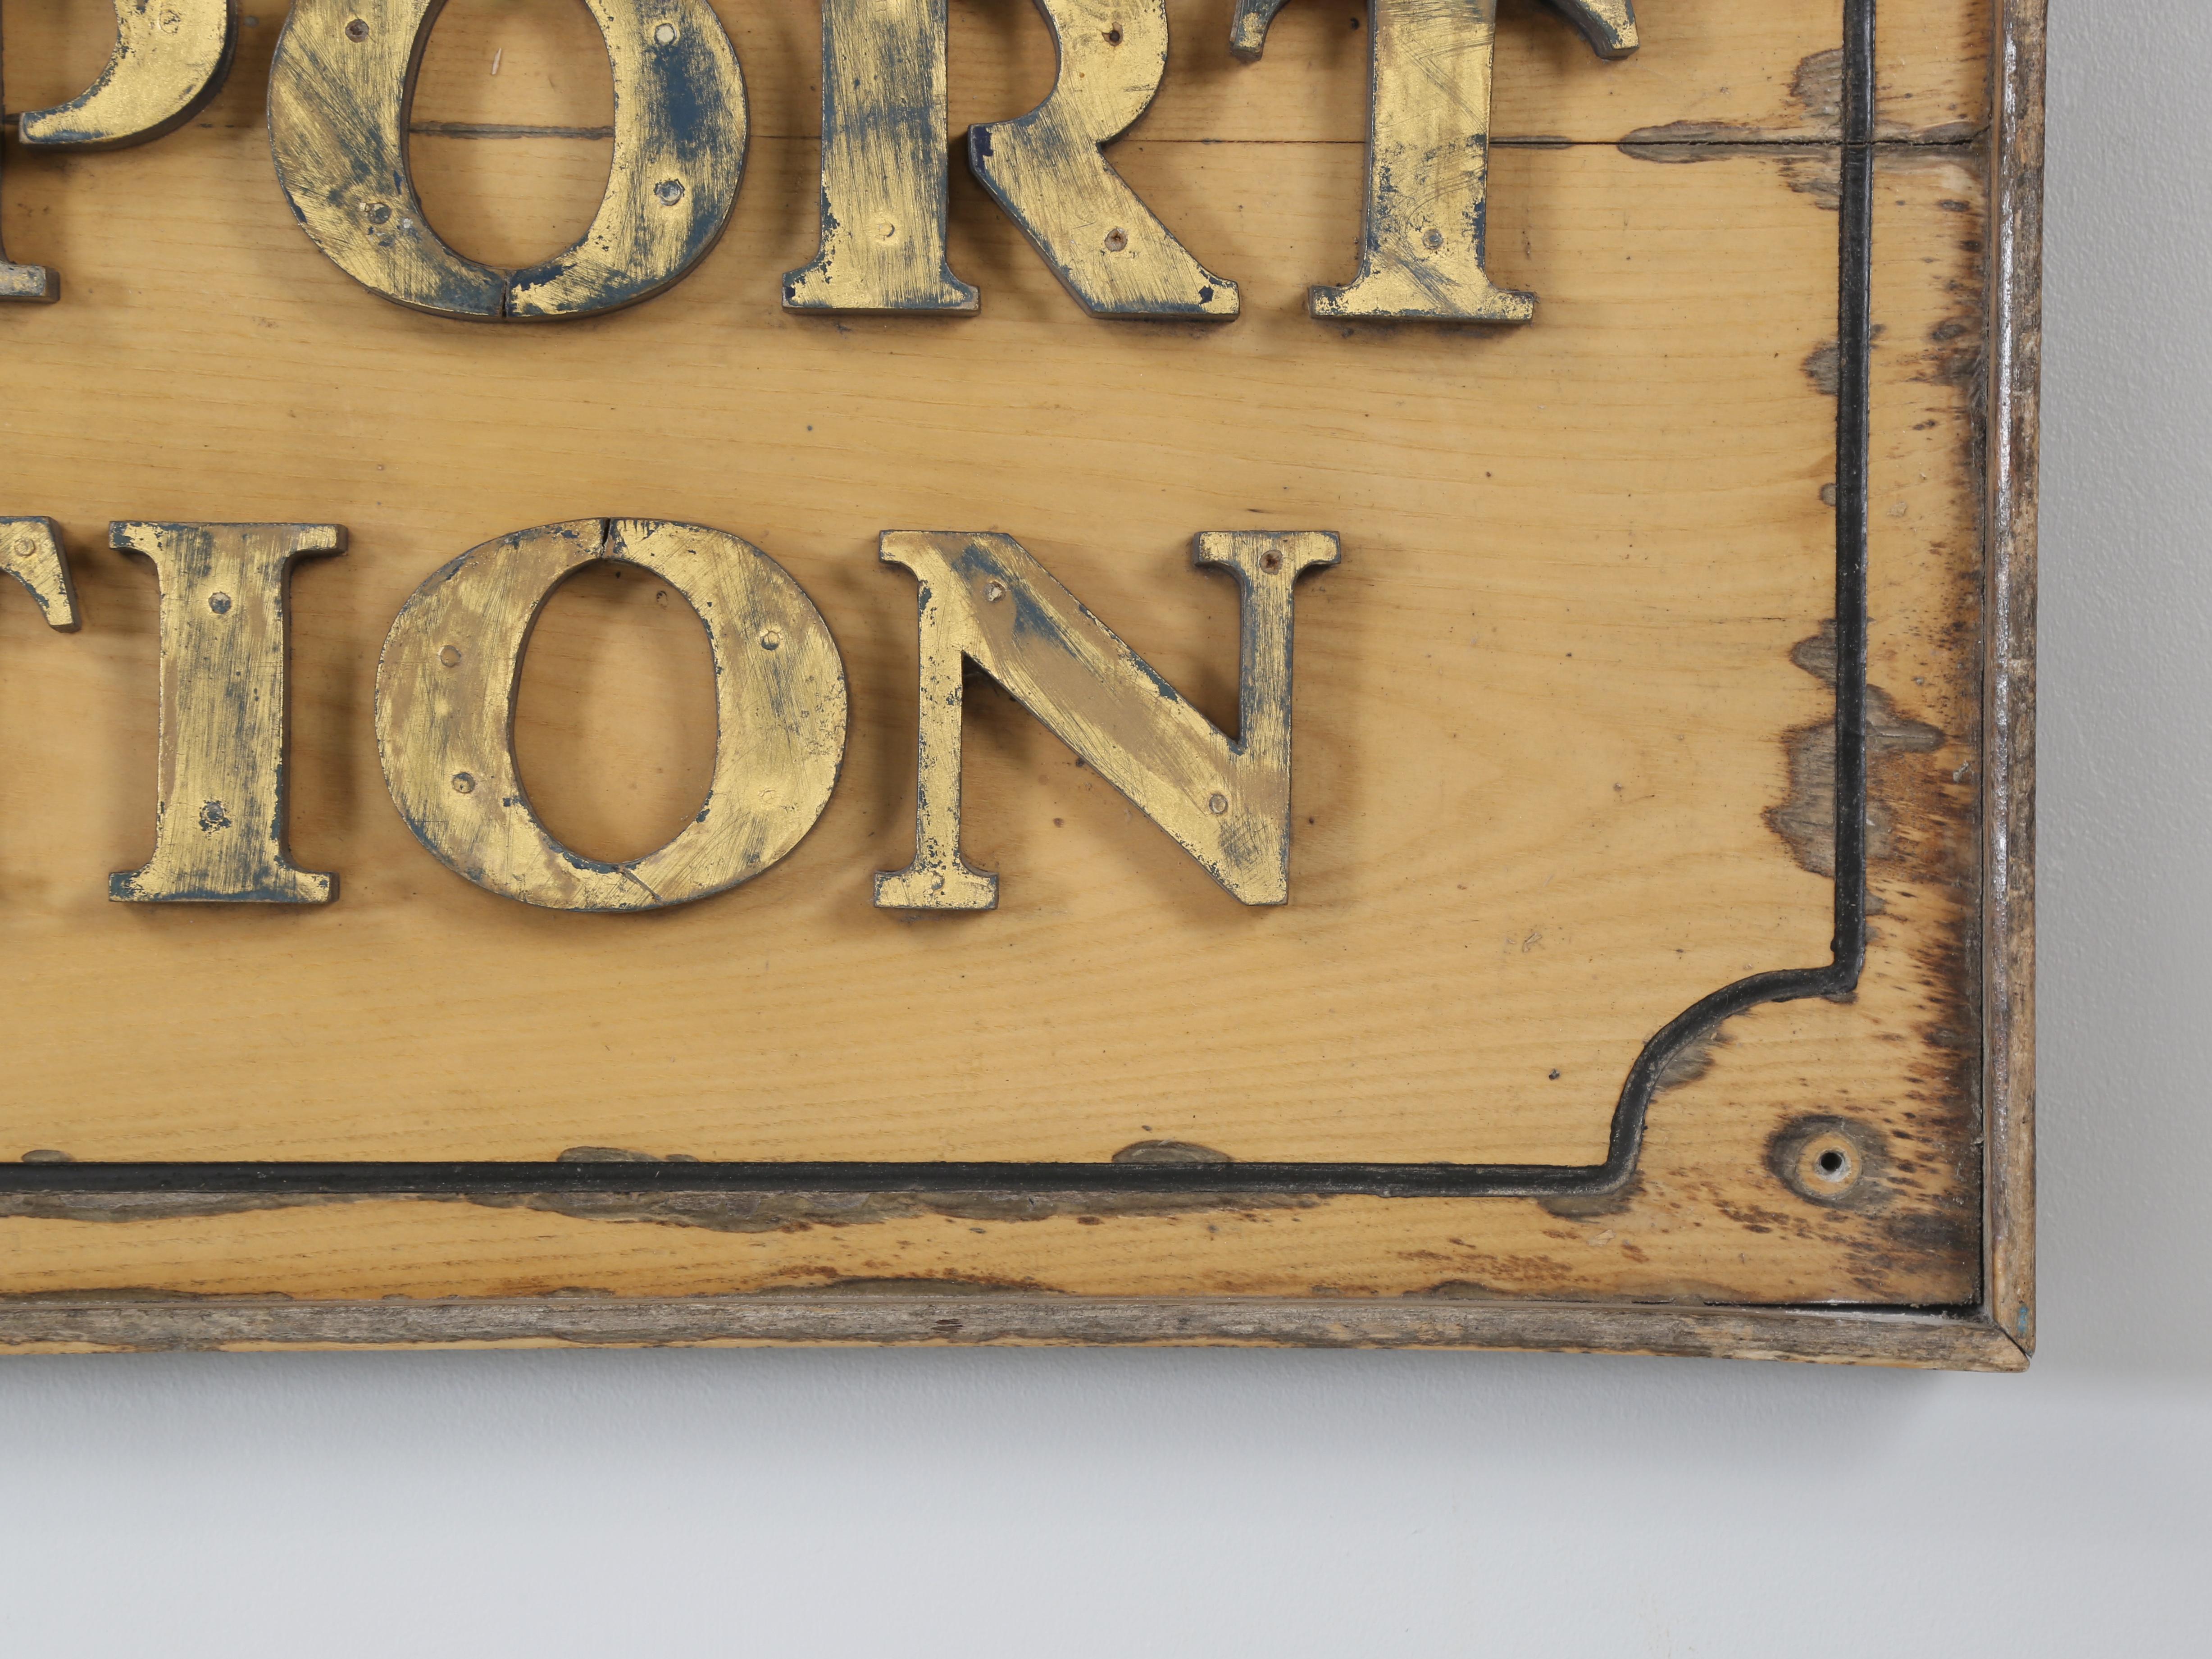 Country Visitors Please Report To Reception, Antique Sign Original Unrestored Condition For Sale